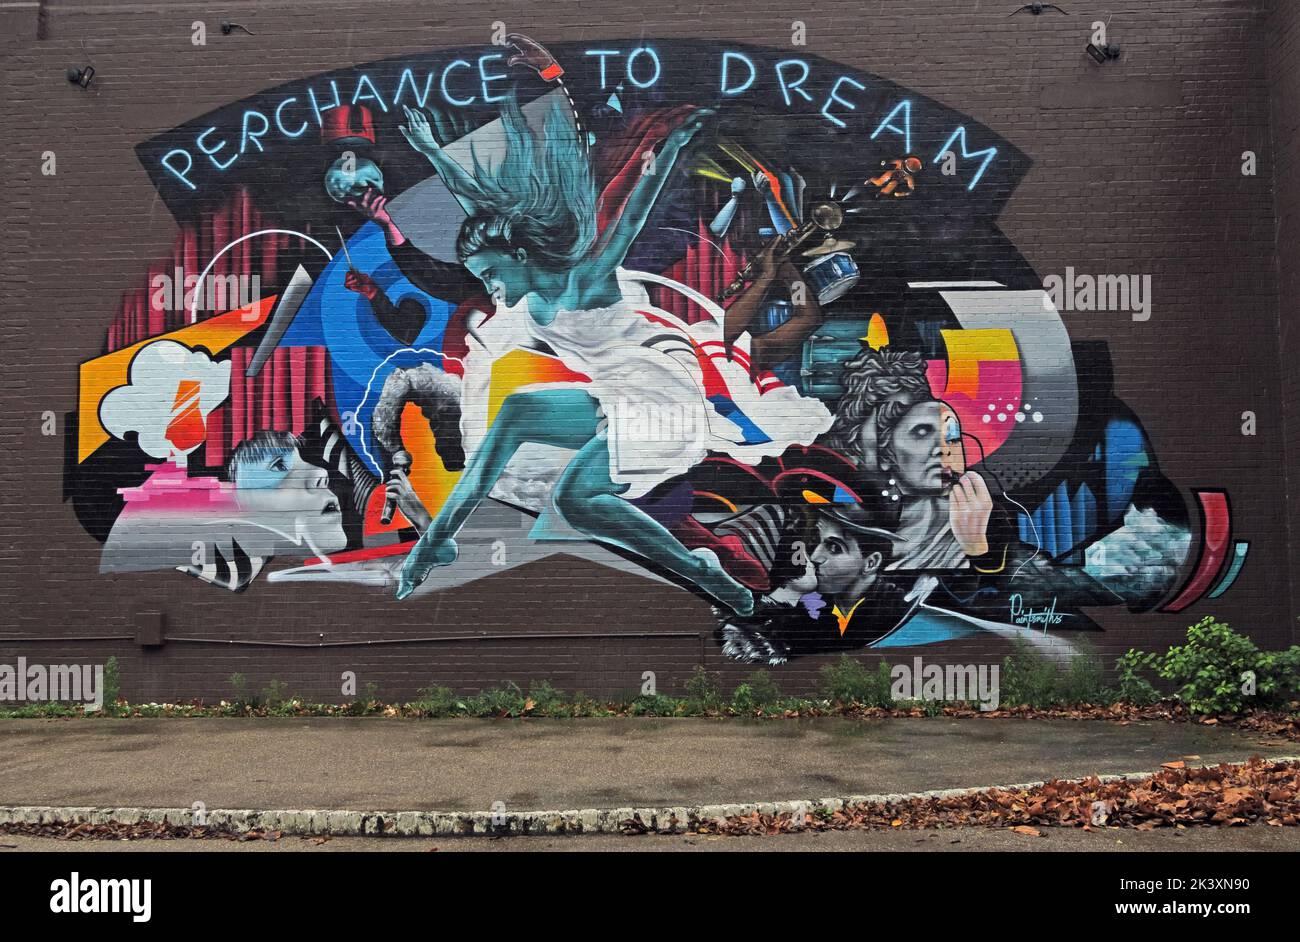 2017, Taunton Brewhouse Theatre mural, Perchance To Dream,by Tom Sledmore and Jack Tierney's work,Coal Orchard, Taunton, Somerset, England ,TA1 1JL Stock Photo